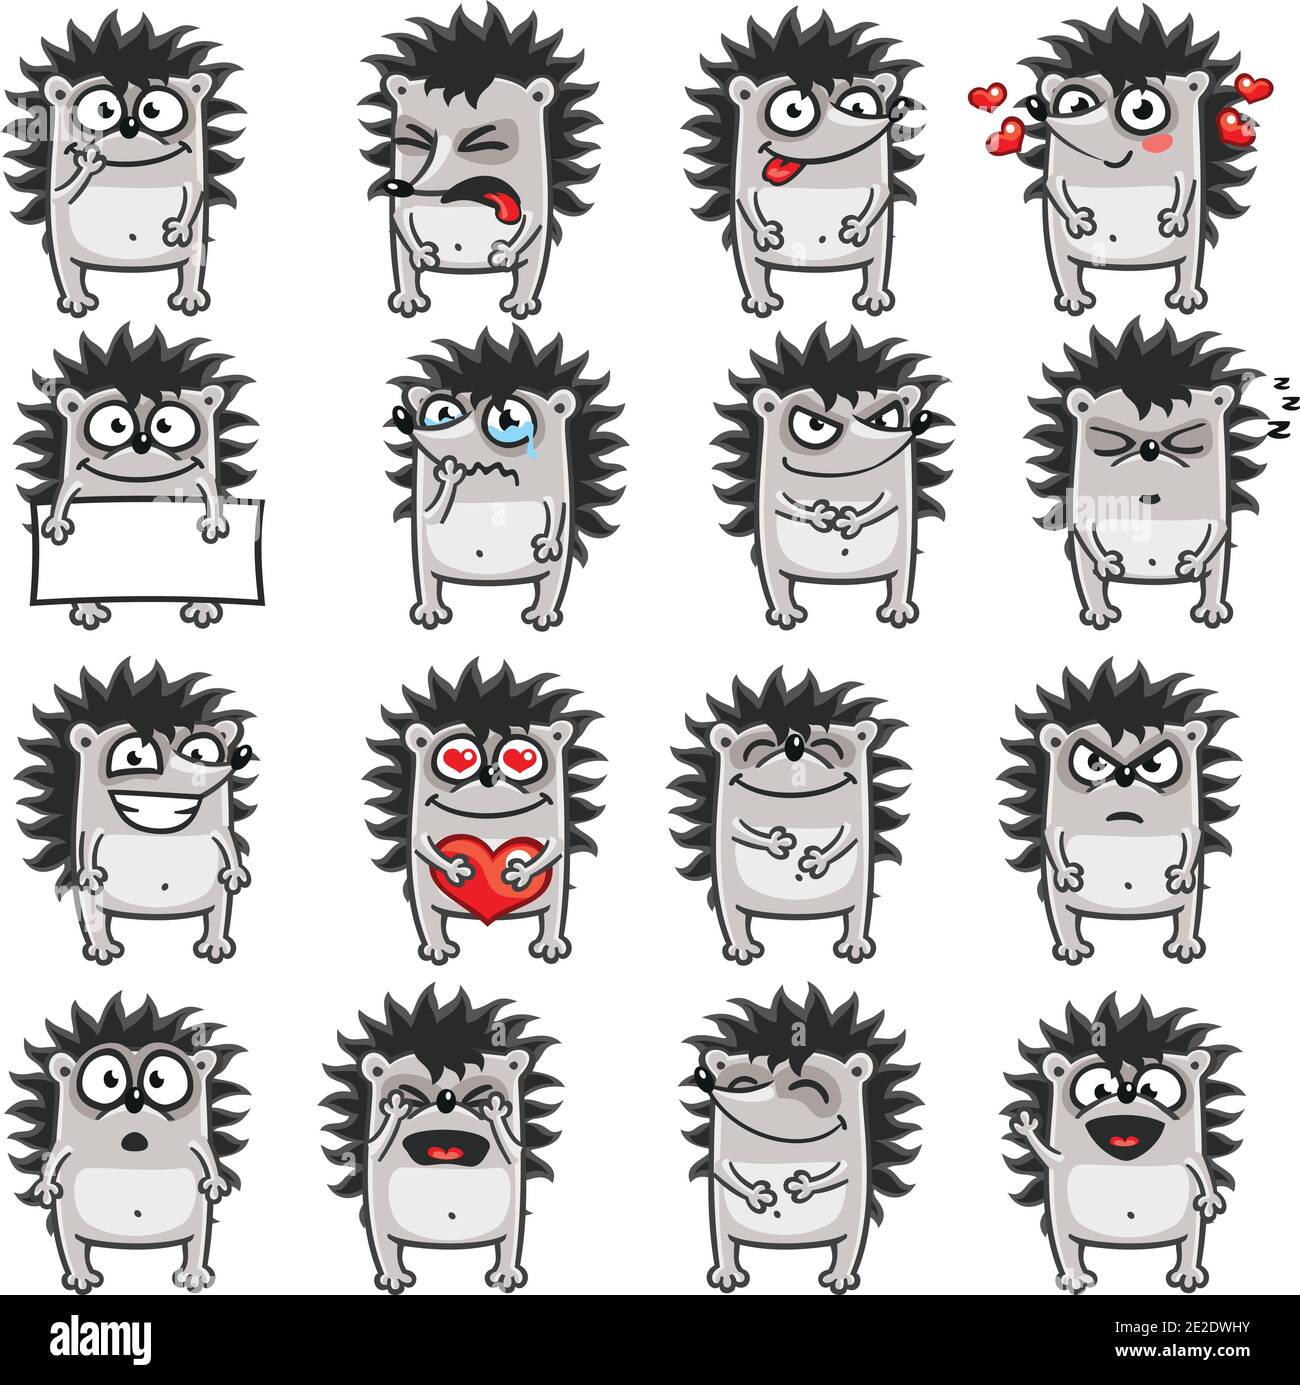 16 smiley hedgehogs individually grouped for easy copy-n-paste.(2) Stock Vector